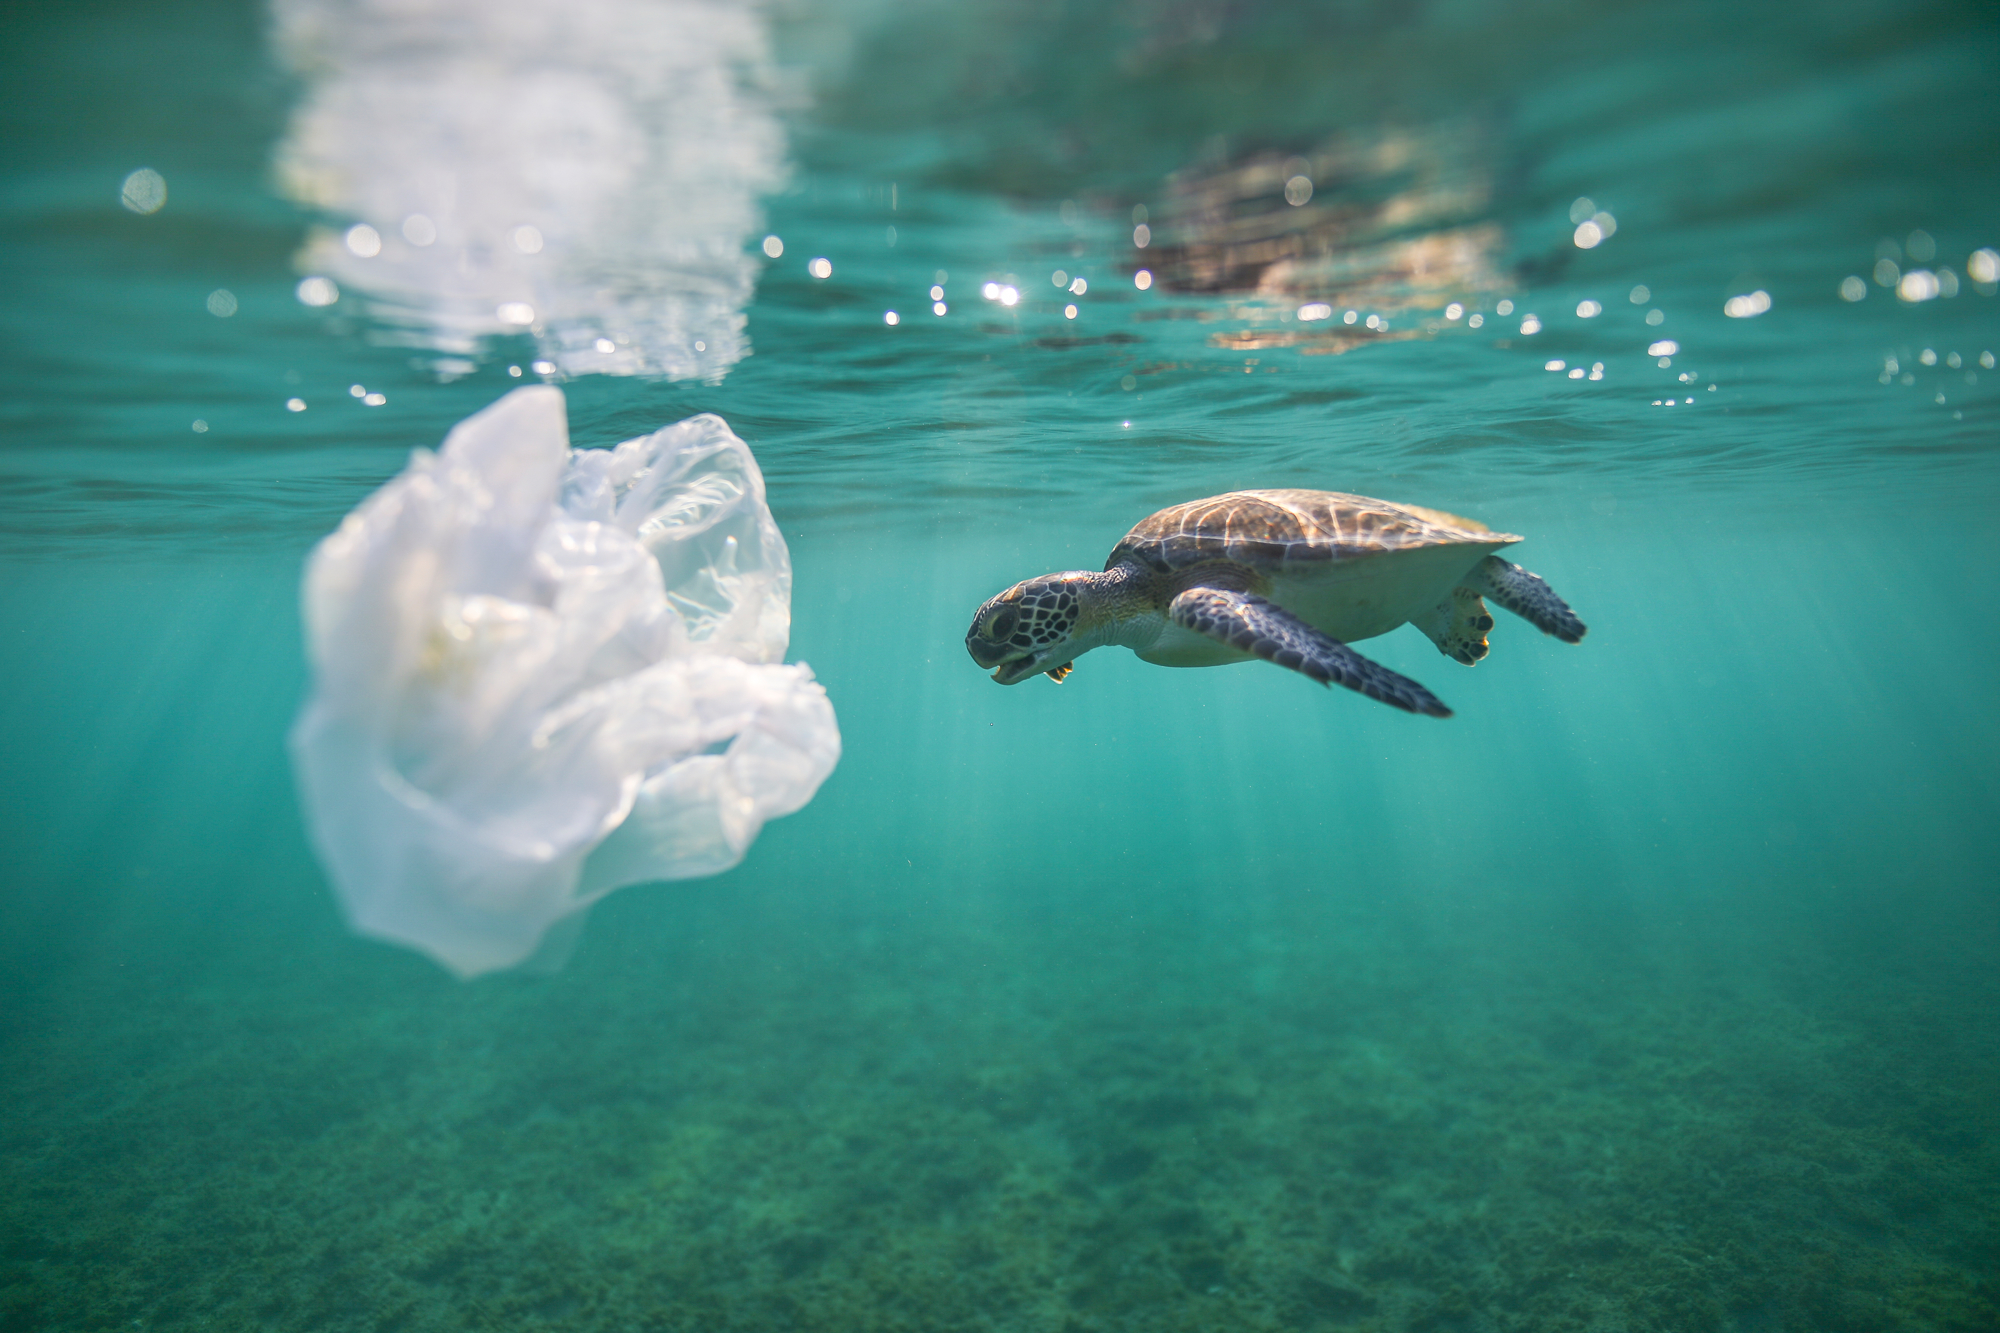 Saving the Ocean From Plastic Six-Pack Rings